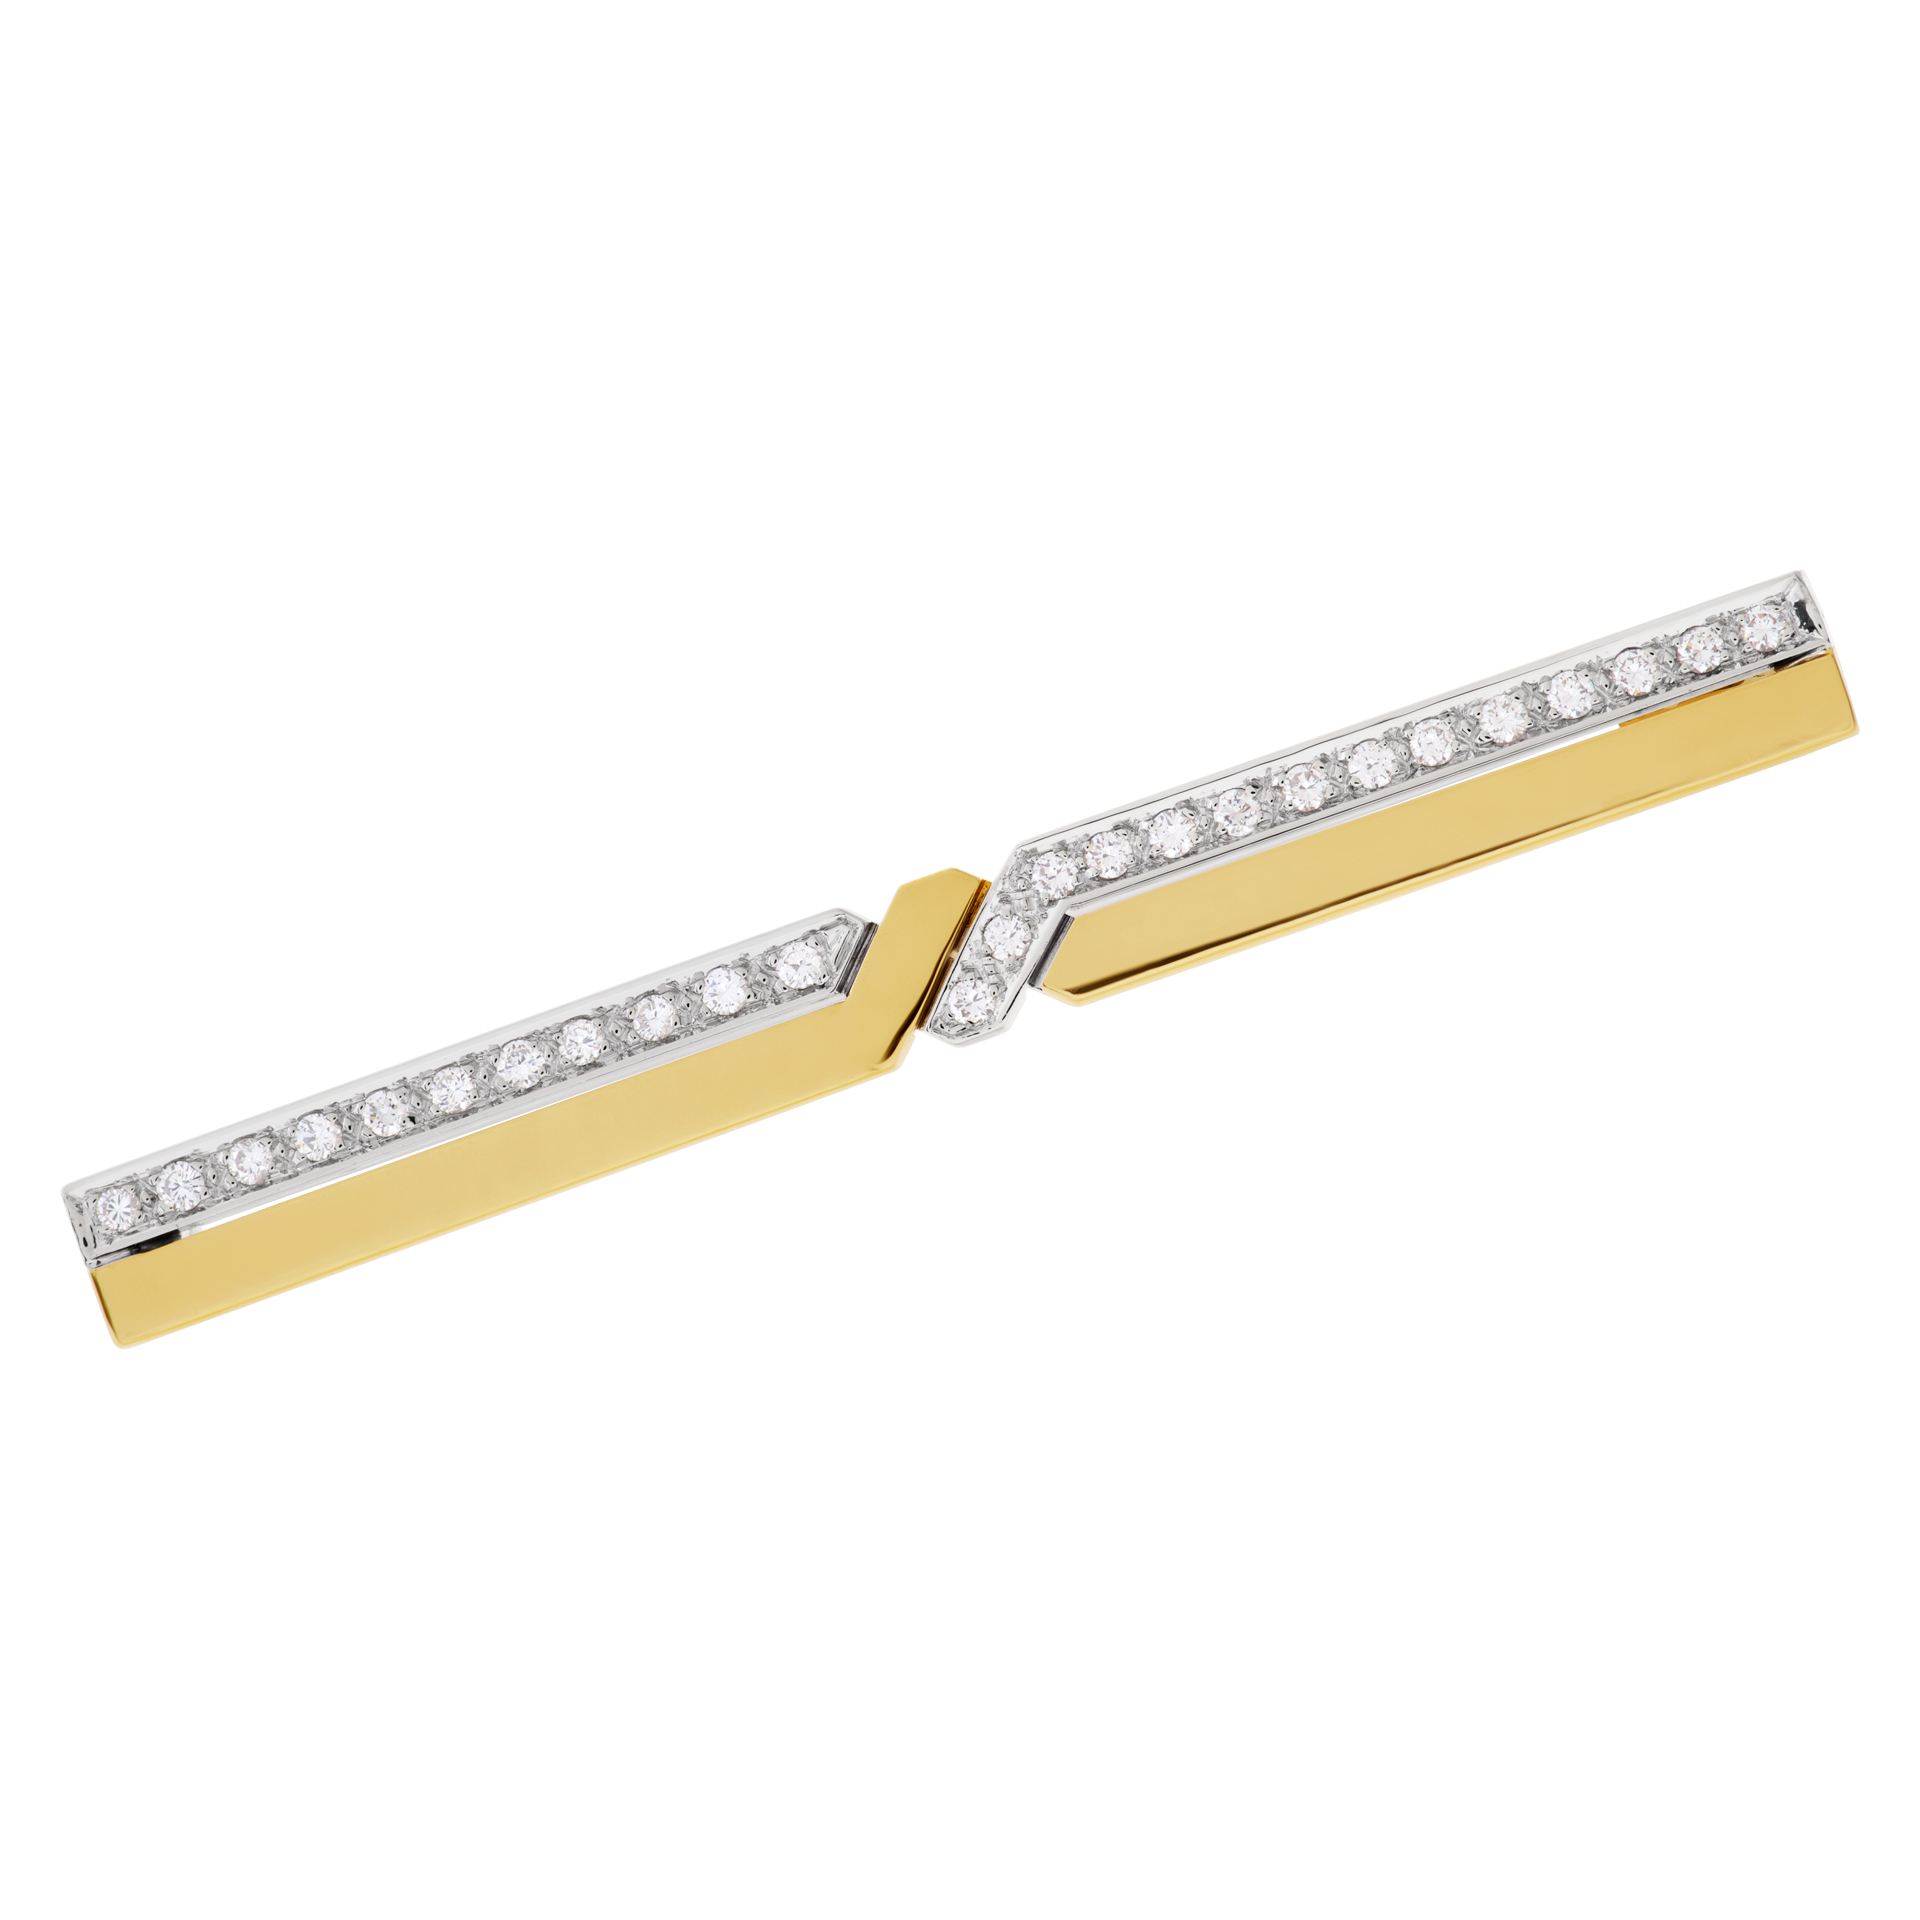 Pomelatto lightning bolt pin in 18k white & yellow gold with app 0.75 cts in diamonds image 1